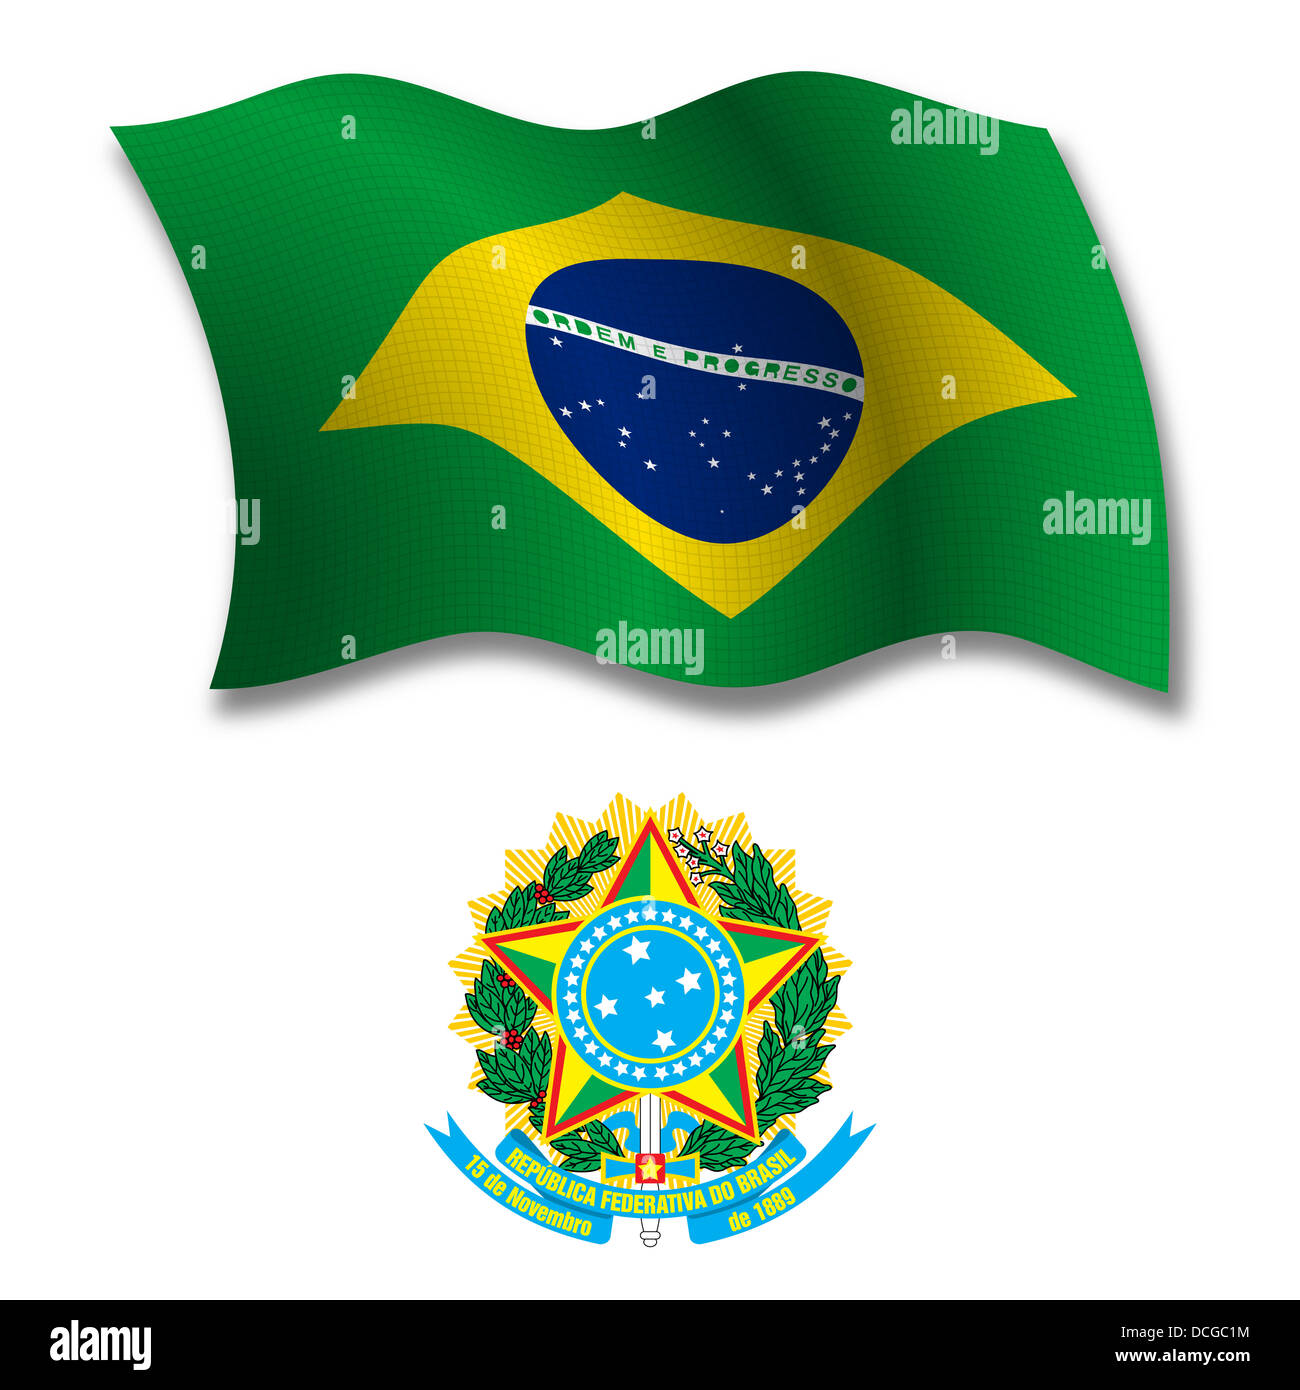 brasil shadowed textured wavy flag and coat of arms against white background, vector art illustration Stock Photo